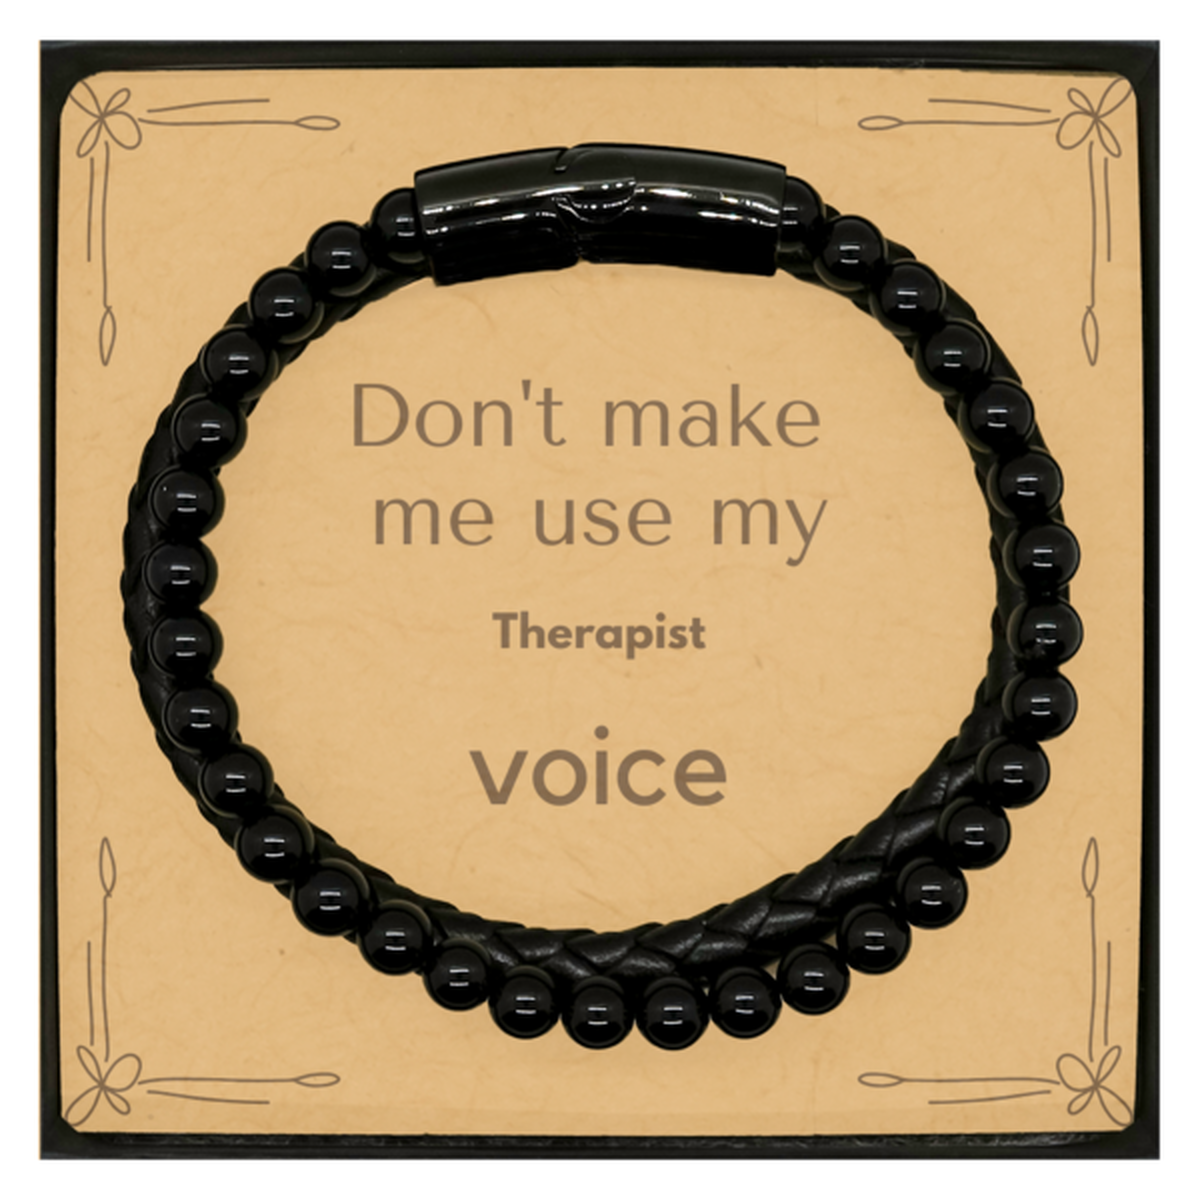 Don't make me use my Therapist voice, Sarcasm Therapist Card Gifts, Christmas Therapist Stone Leather Bracelets Birthday Unique Gifts For Therapist Coworkers, Men, Women, Colleague, Friends